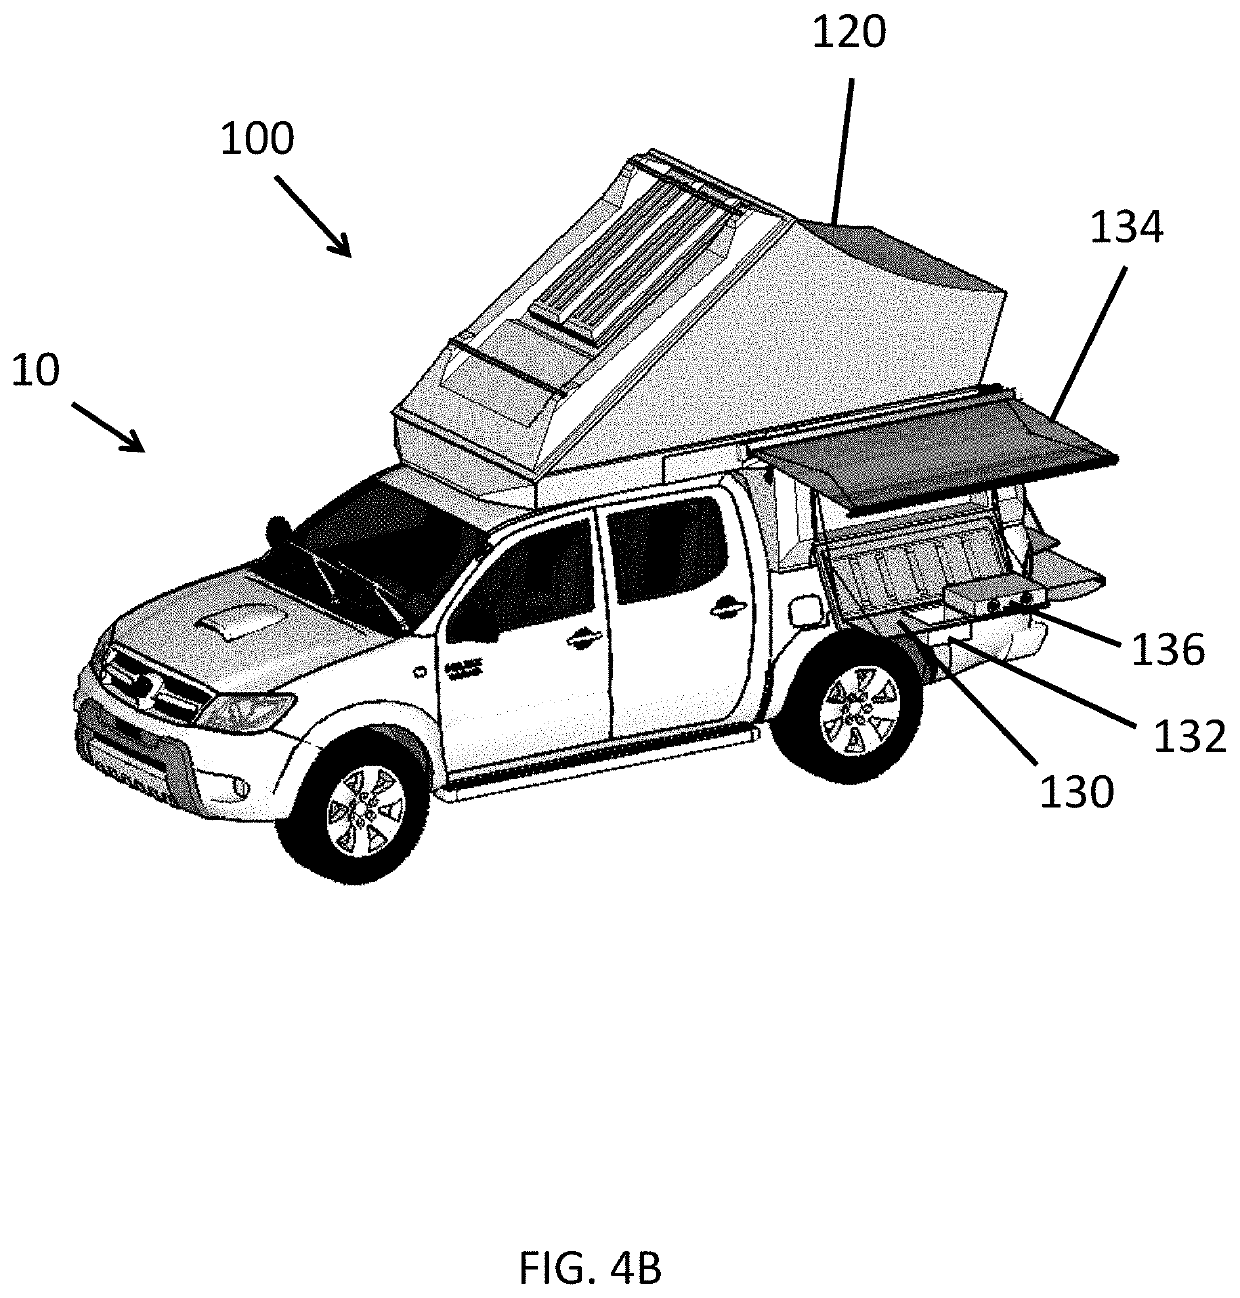 Pop-up camper shell for pickup truck and vehicle roof